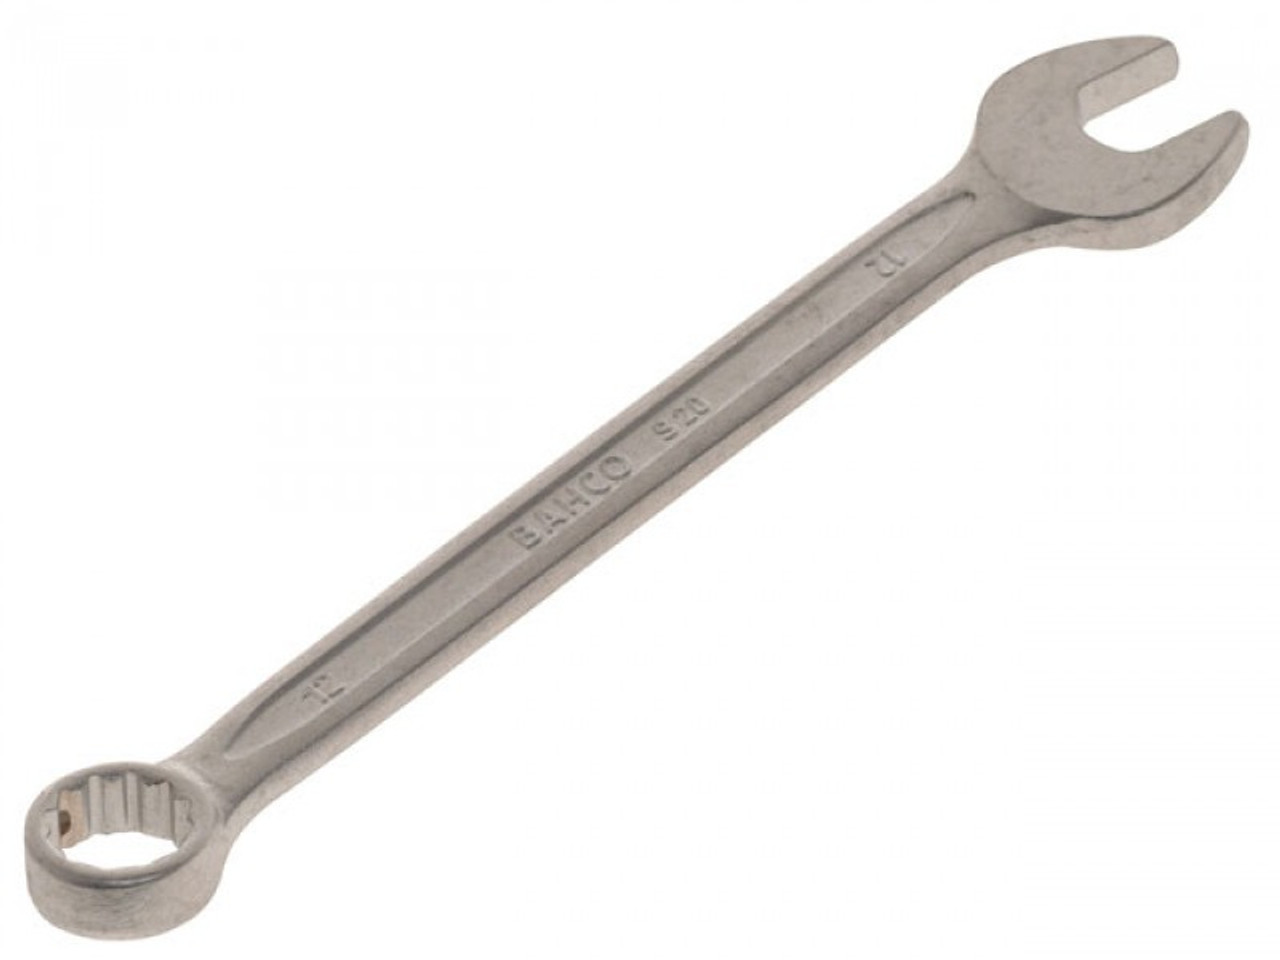 IMPA 616130 WRENCH OPEN & 12-POINT BOX METRIC 7mm   CHINA